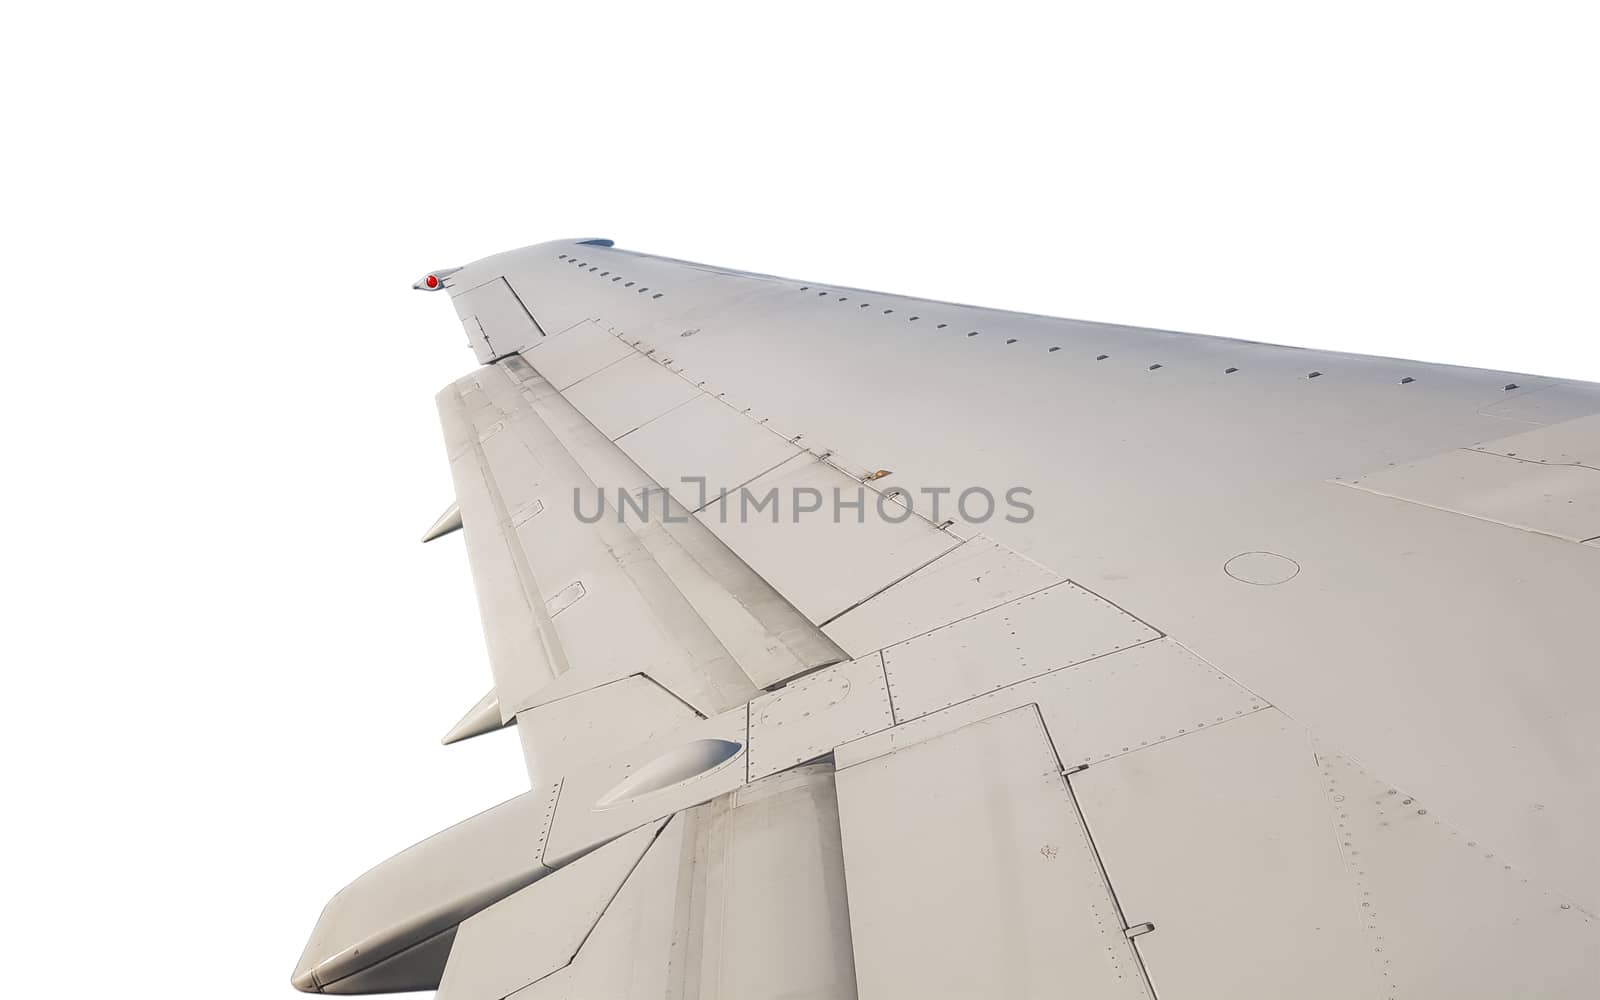 Isolated jet wing plane during flight, left wing view